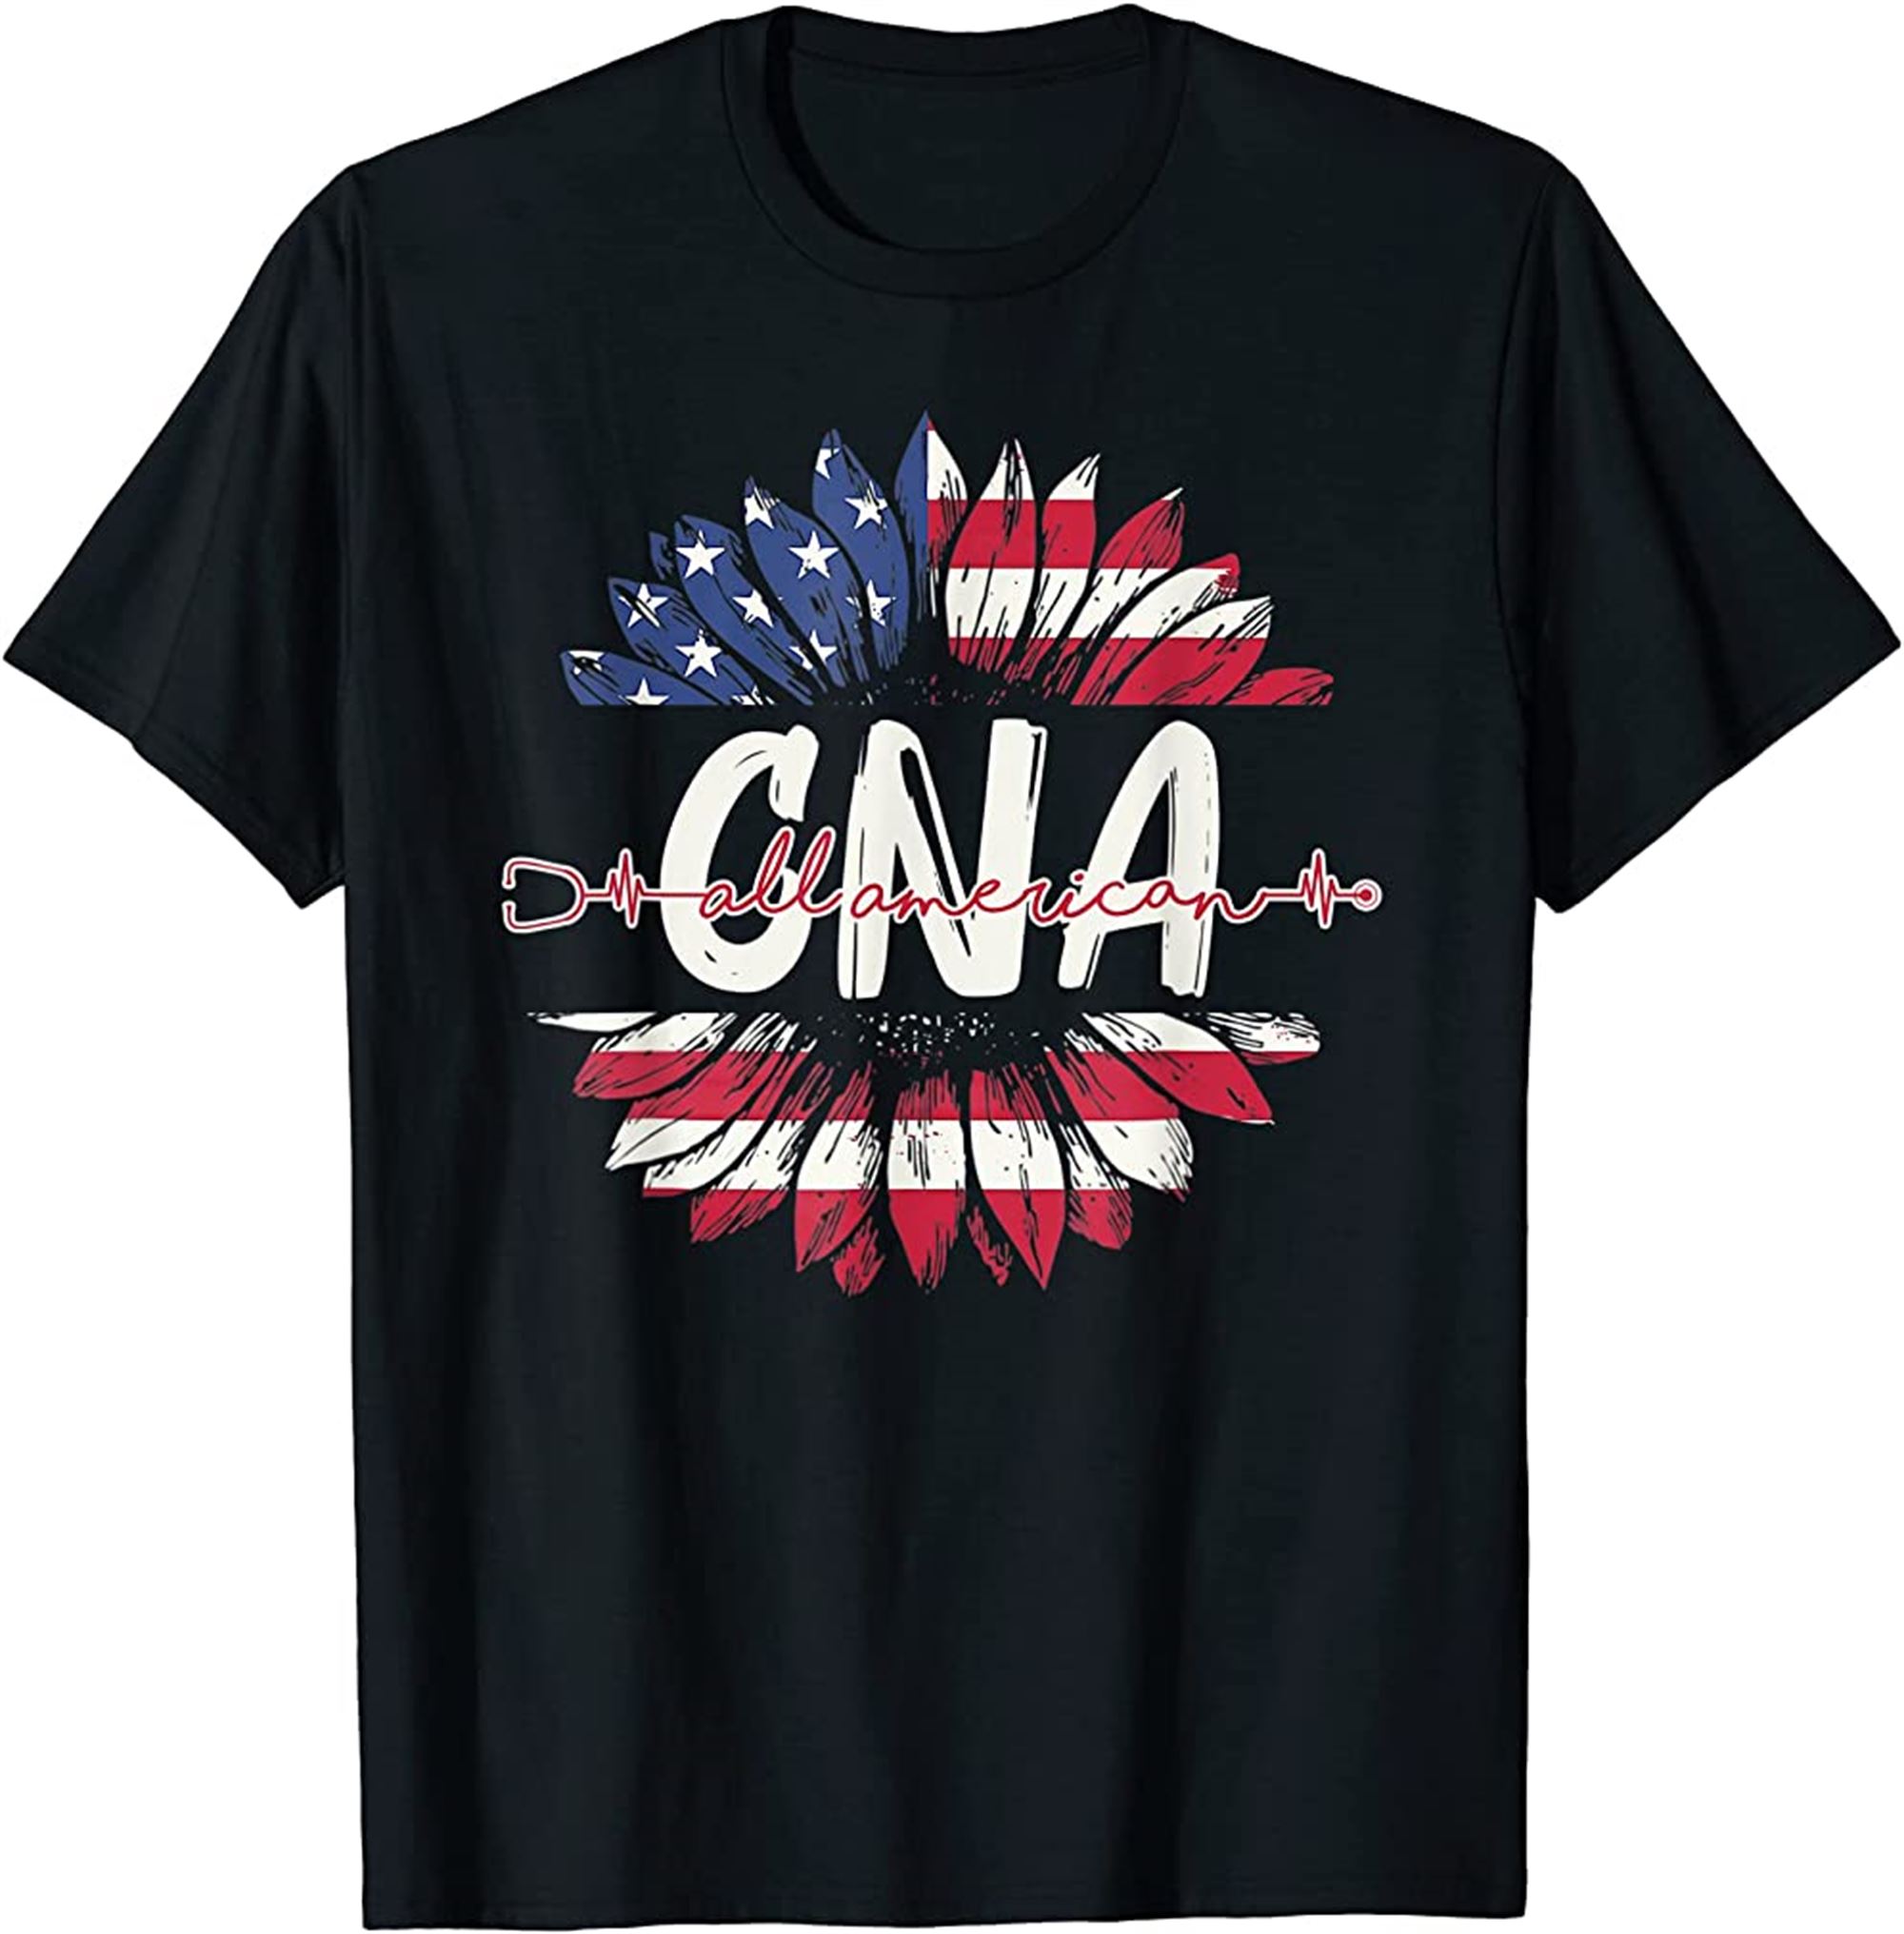 All American Cna Life American Flag Sunflower 4th Of July T-shirt Size Up To 5xl